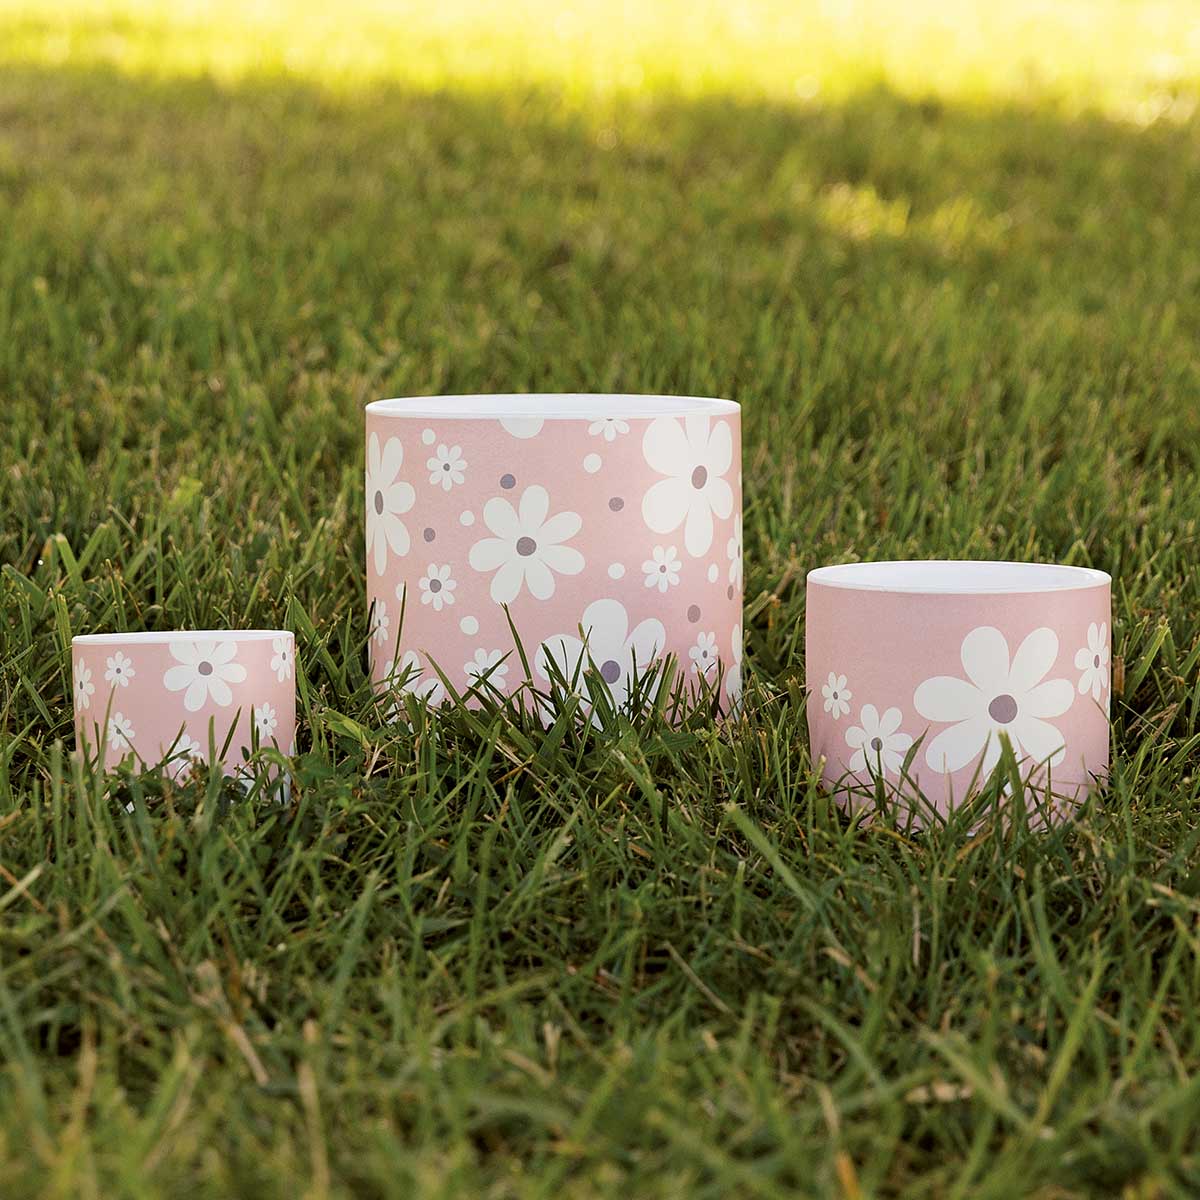 b50 POT WHOOPSIE DAISY SMALL 3IN X 2.5IN PINK/WHITE CERAMIC - Click Image to Close